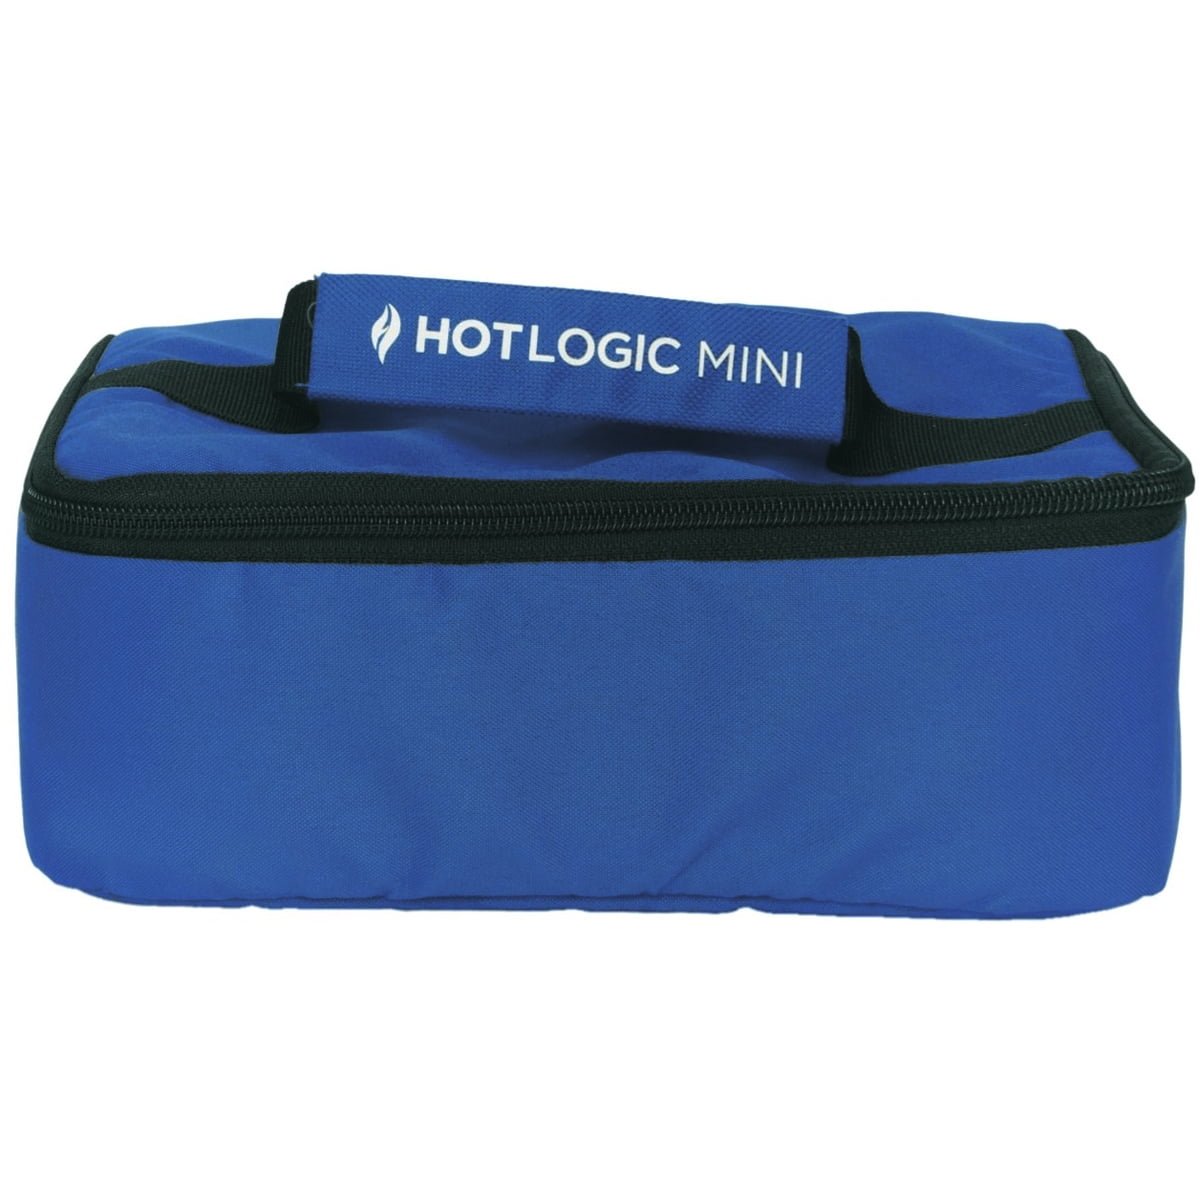 HotLogic Mini Portable Food Warmer for Home, Office, and Travel